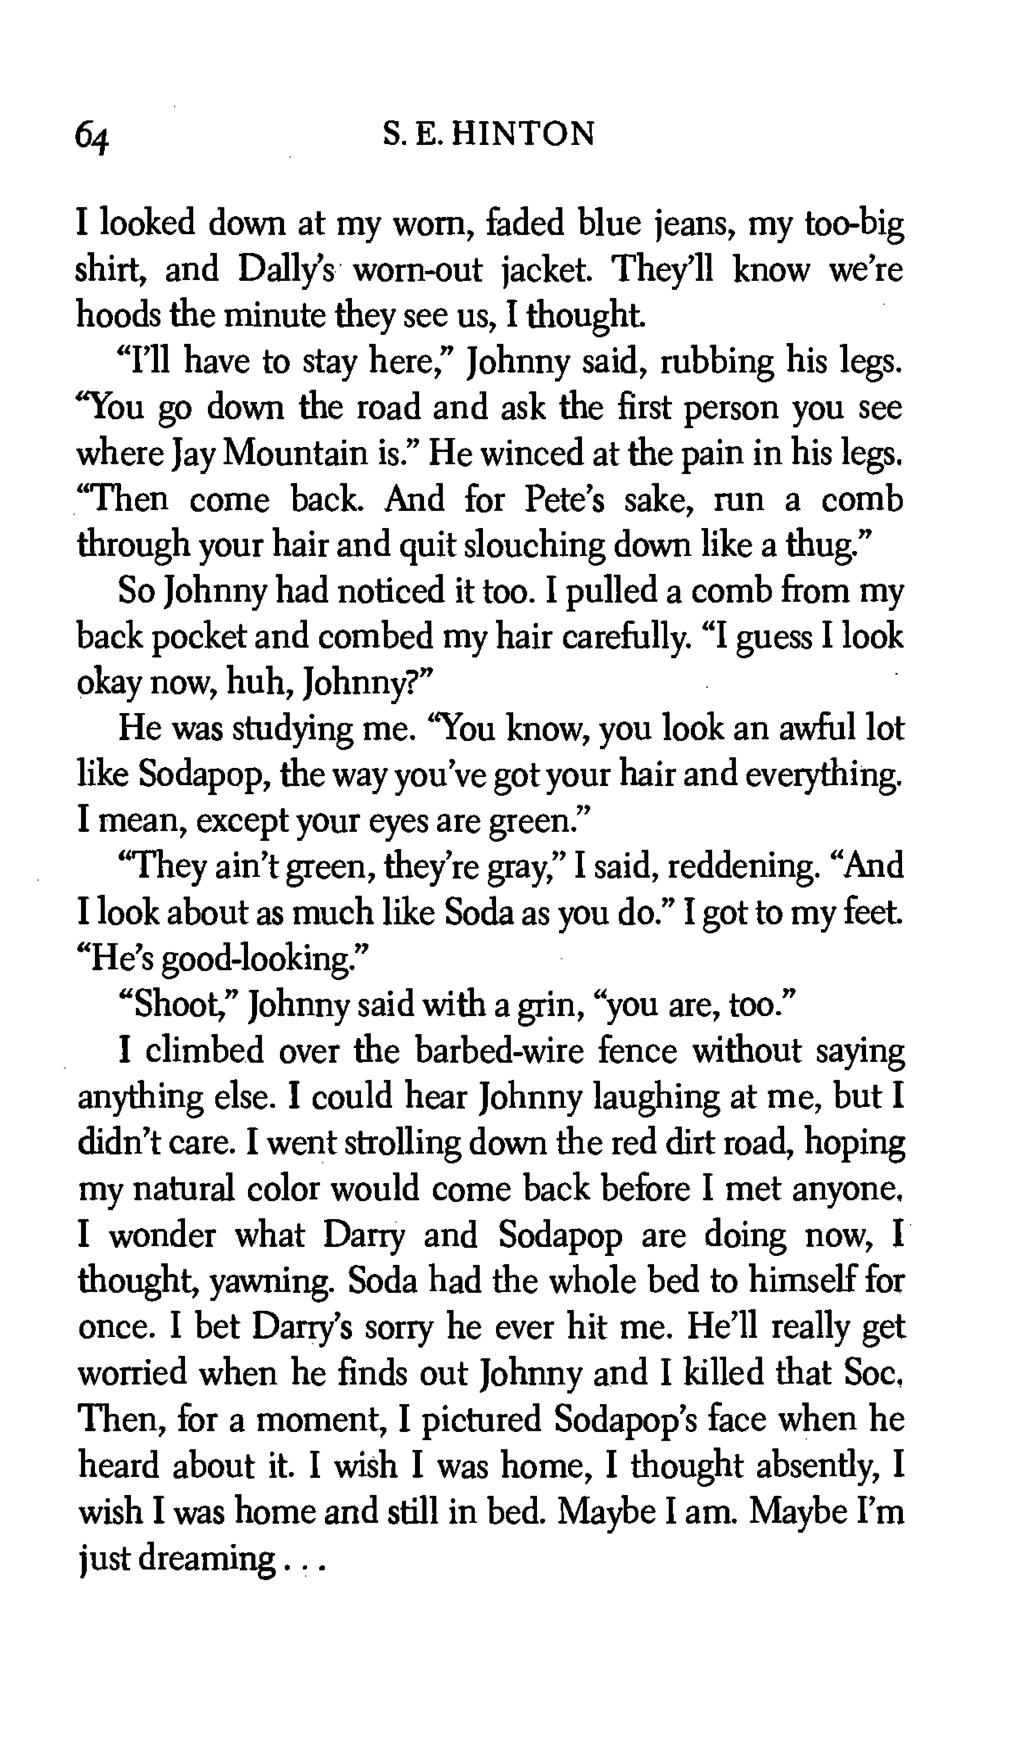 PRINT PAGE 64 I looked down at my worn, faded blue jeans, my too-big shirt, and Dally's worn-out jacket.